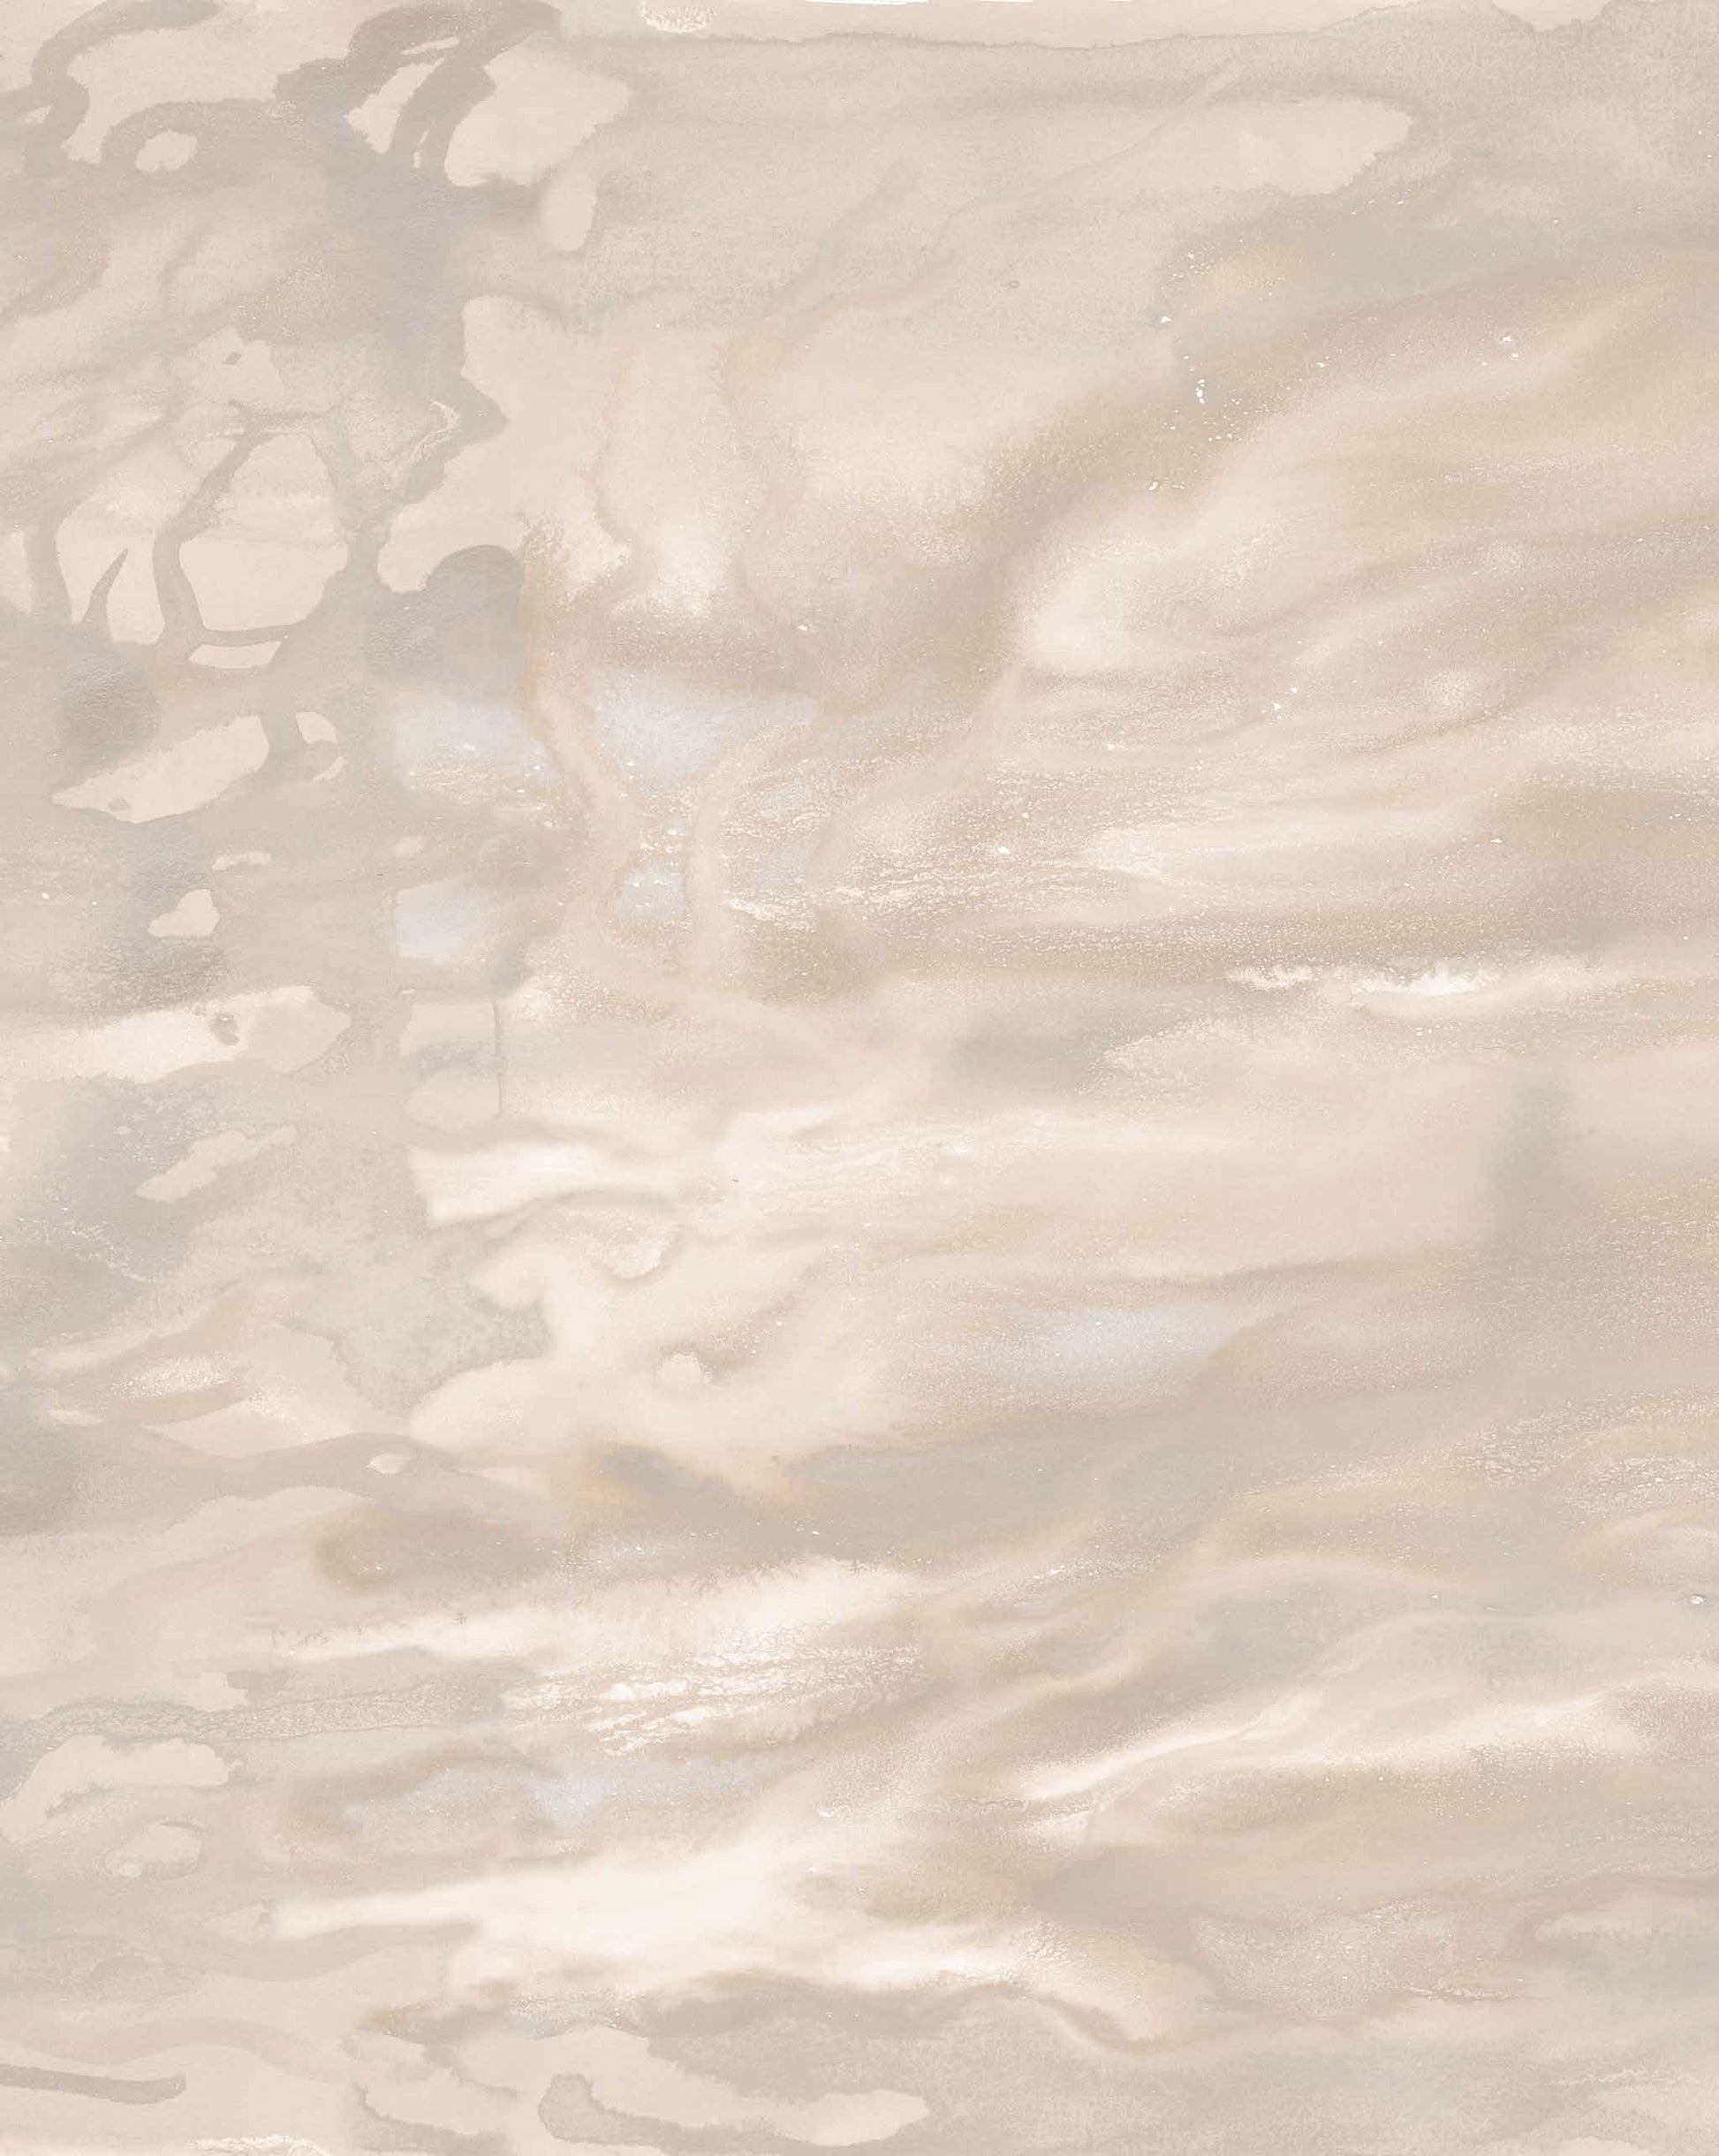 Abstract beige watercolor painting with fluid, Delta Wallpaper Mural ||Camel design patterns in various shades of brown and cream.